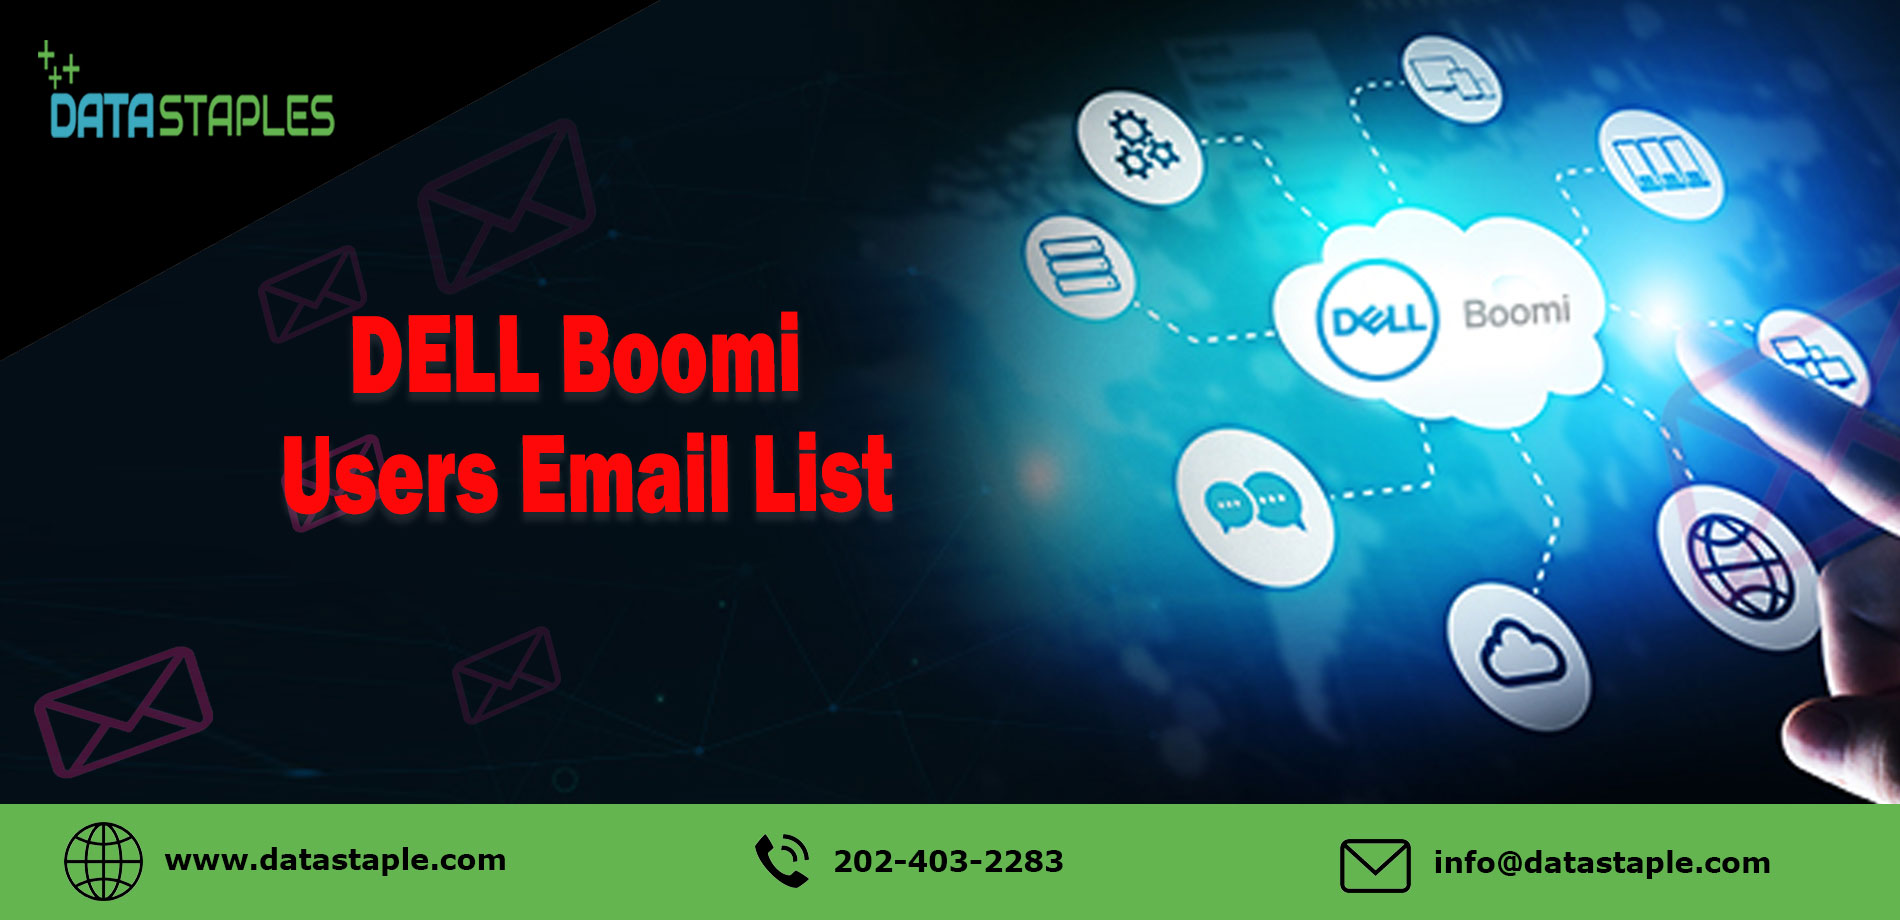 DELL Boomi Users Email List | DataStaples